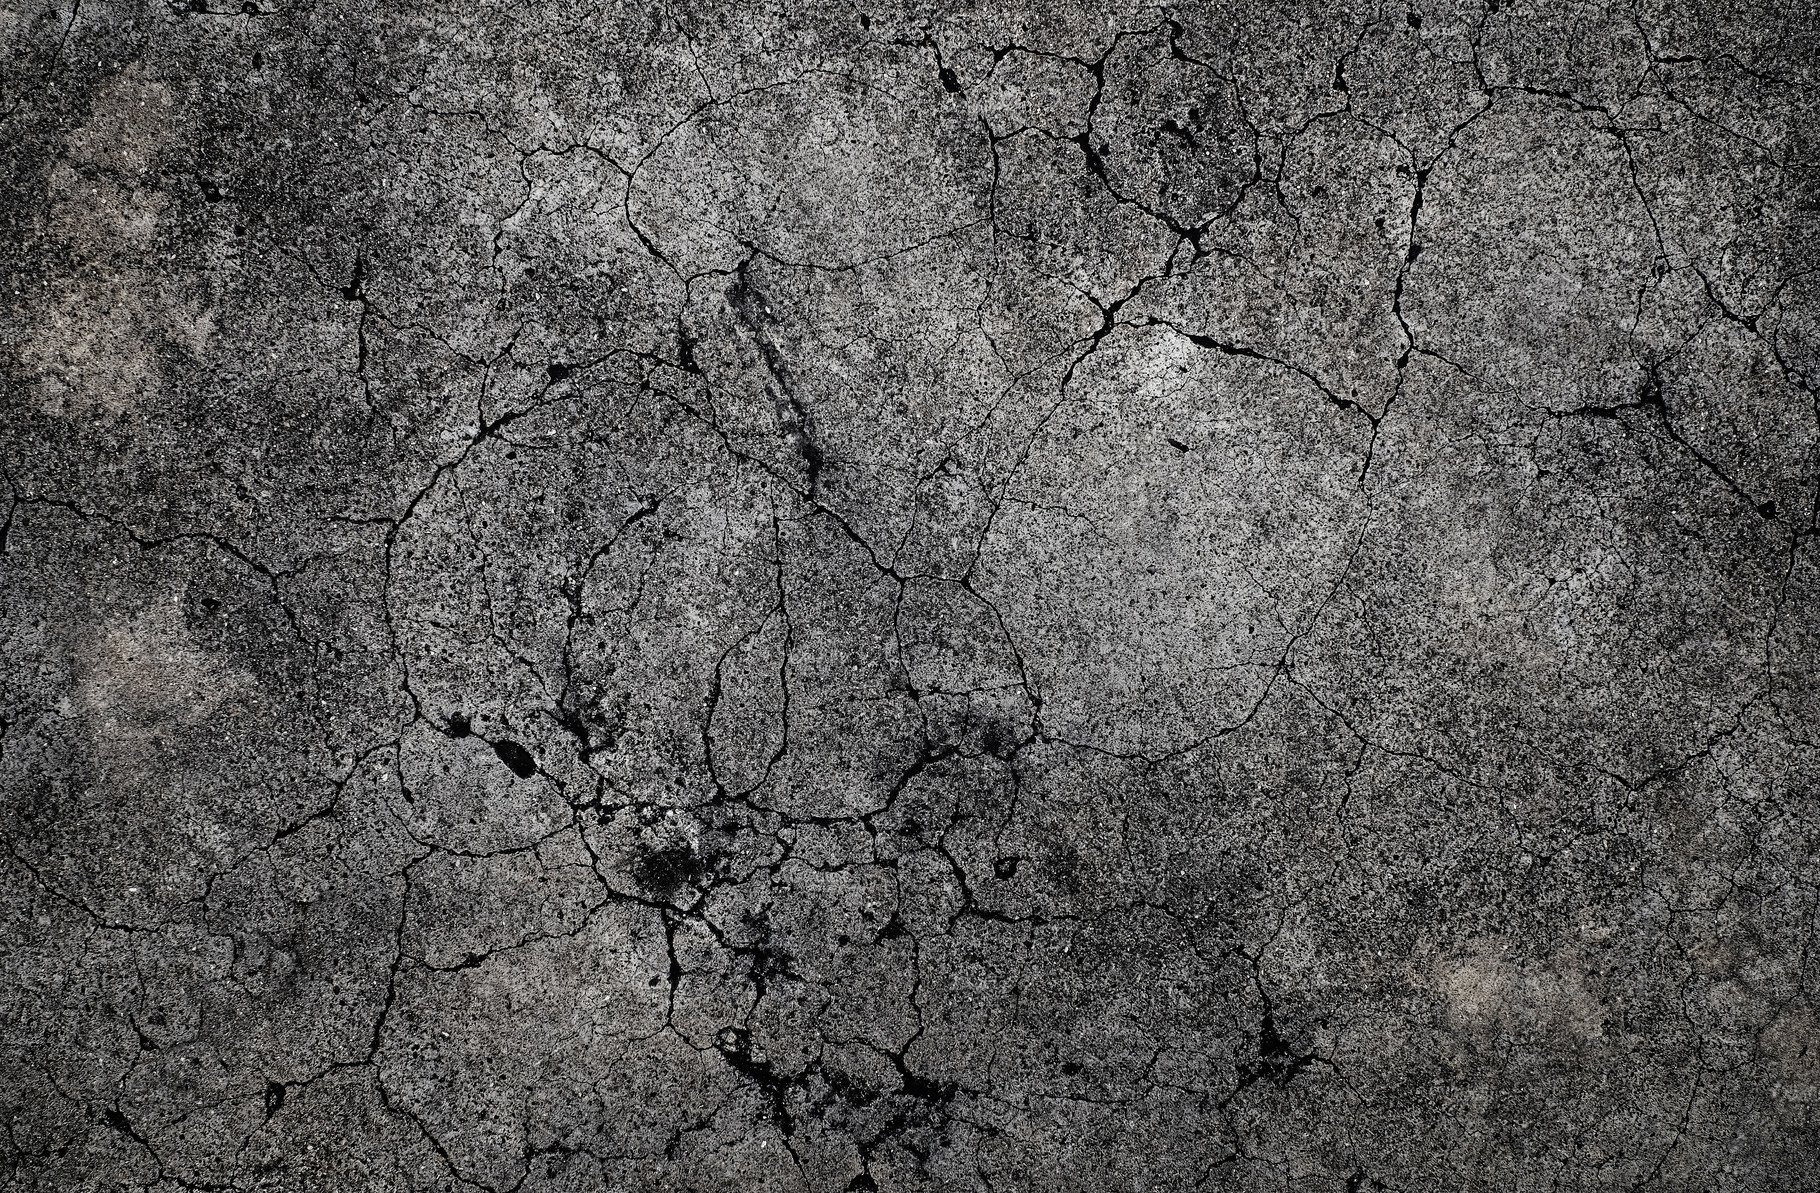 Cracked Concrete Texture Background High Quality Architecture